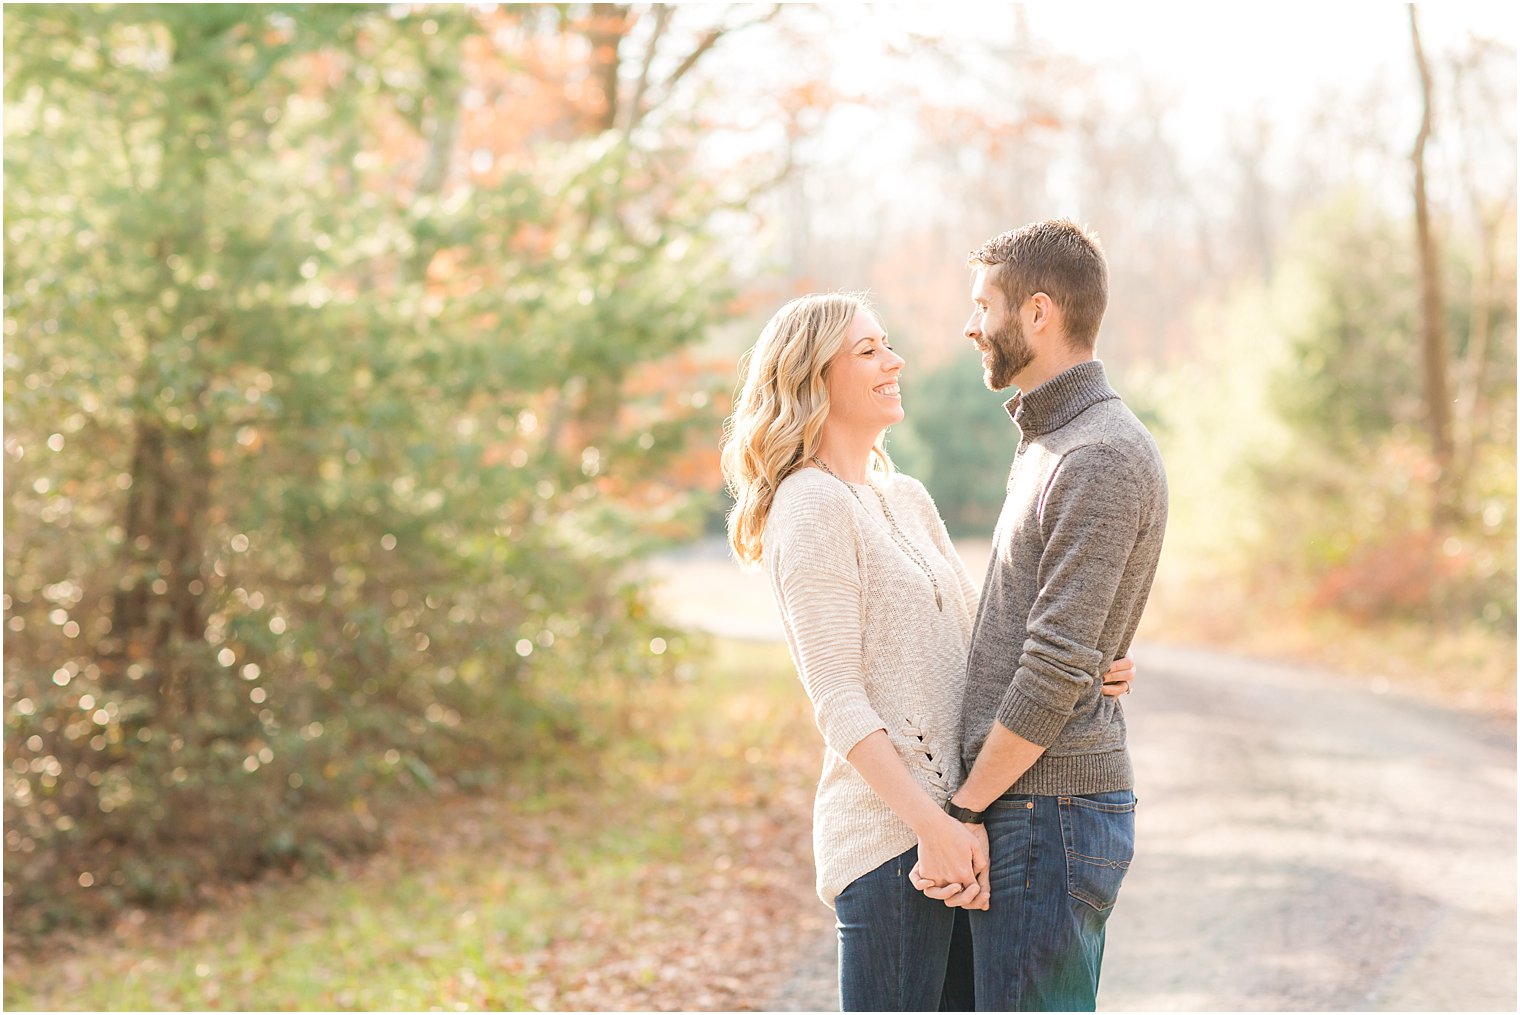 Engagement session in pretty light by Idalia Photography